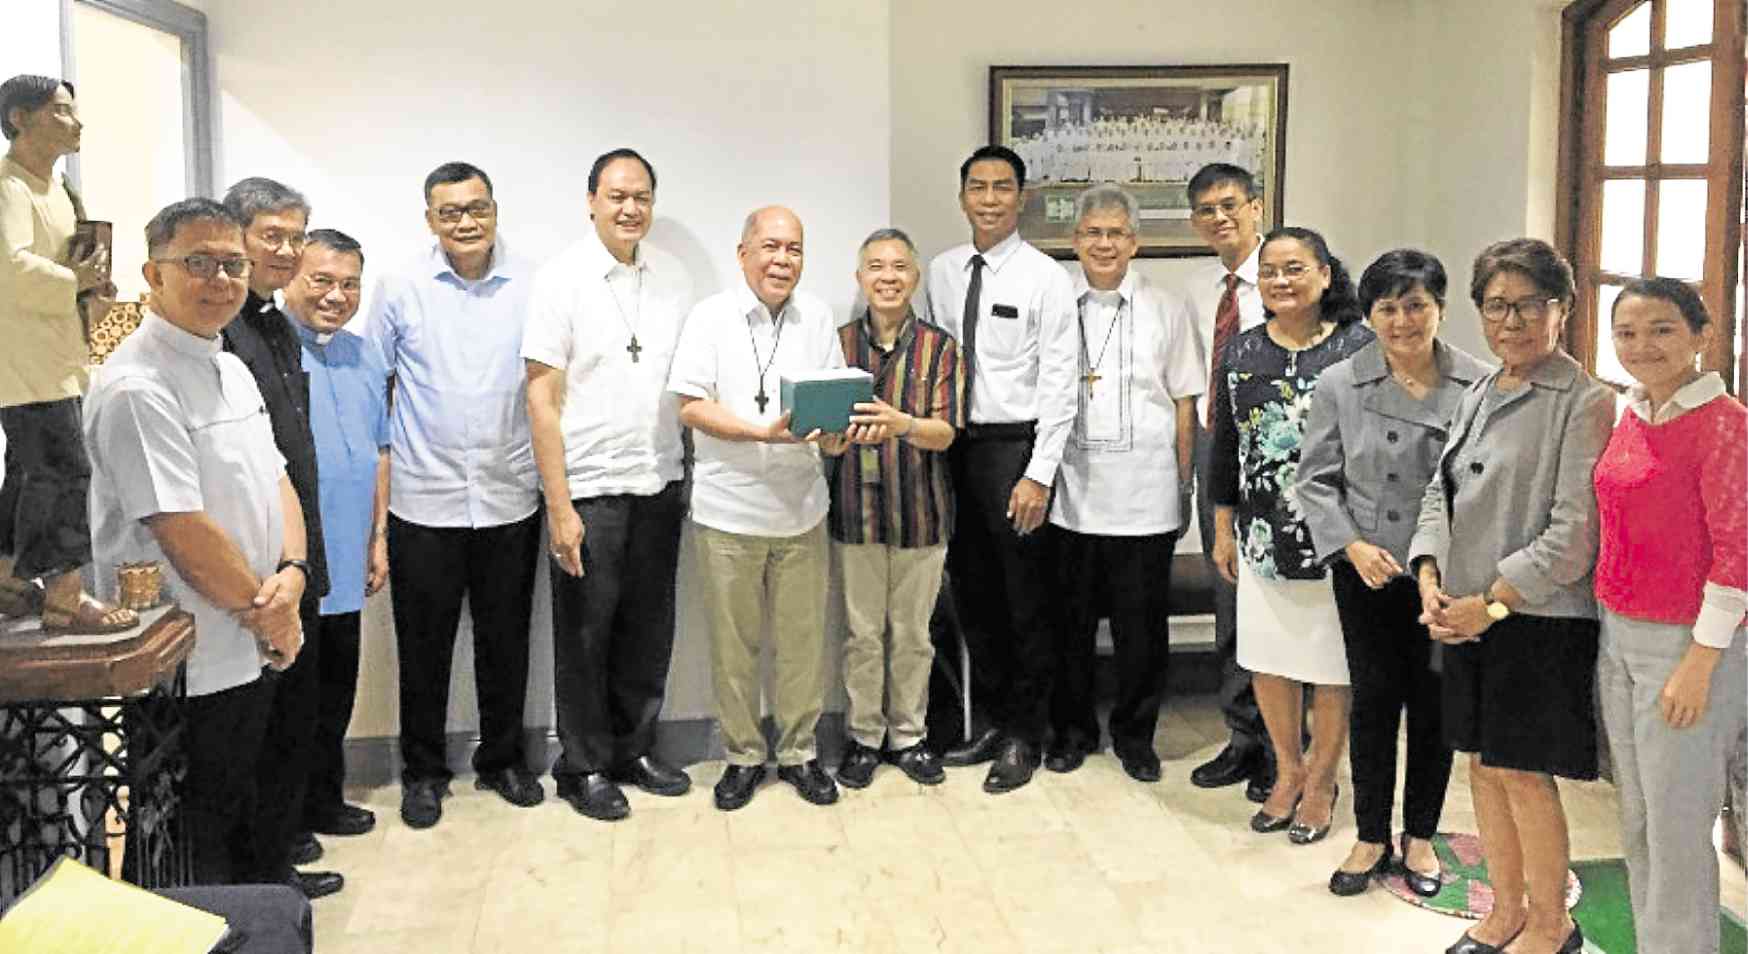 Mormons turn over 4 centuries of digitized Philippine Catholic records to CBCP